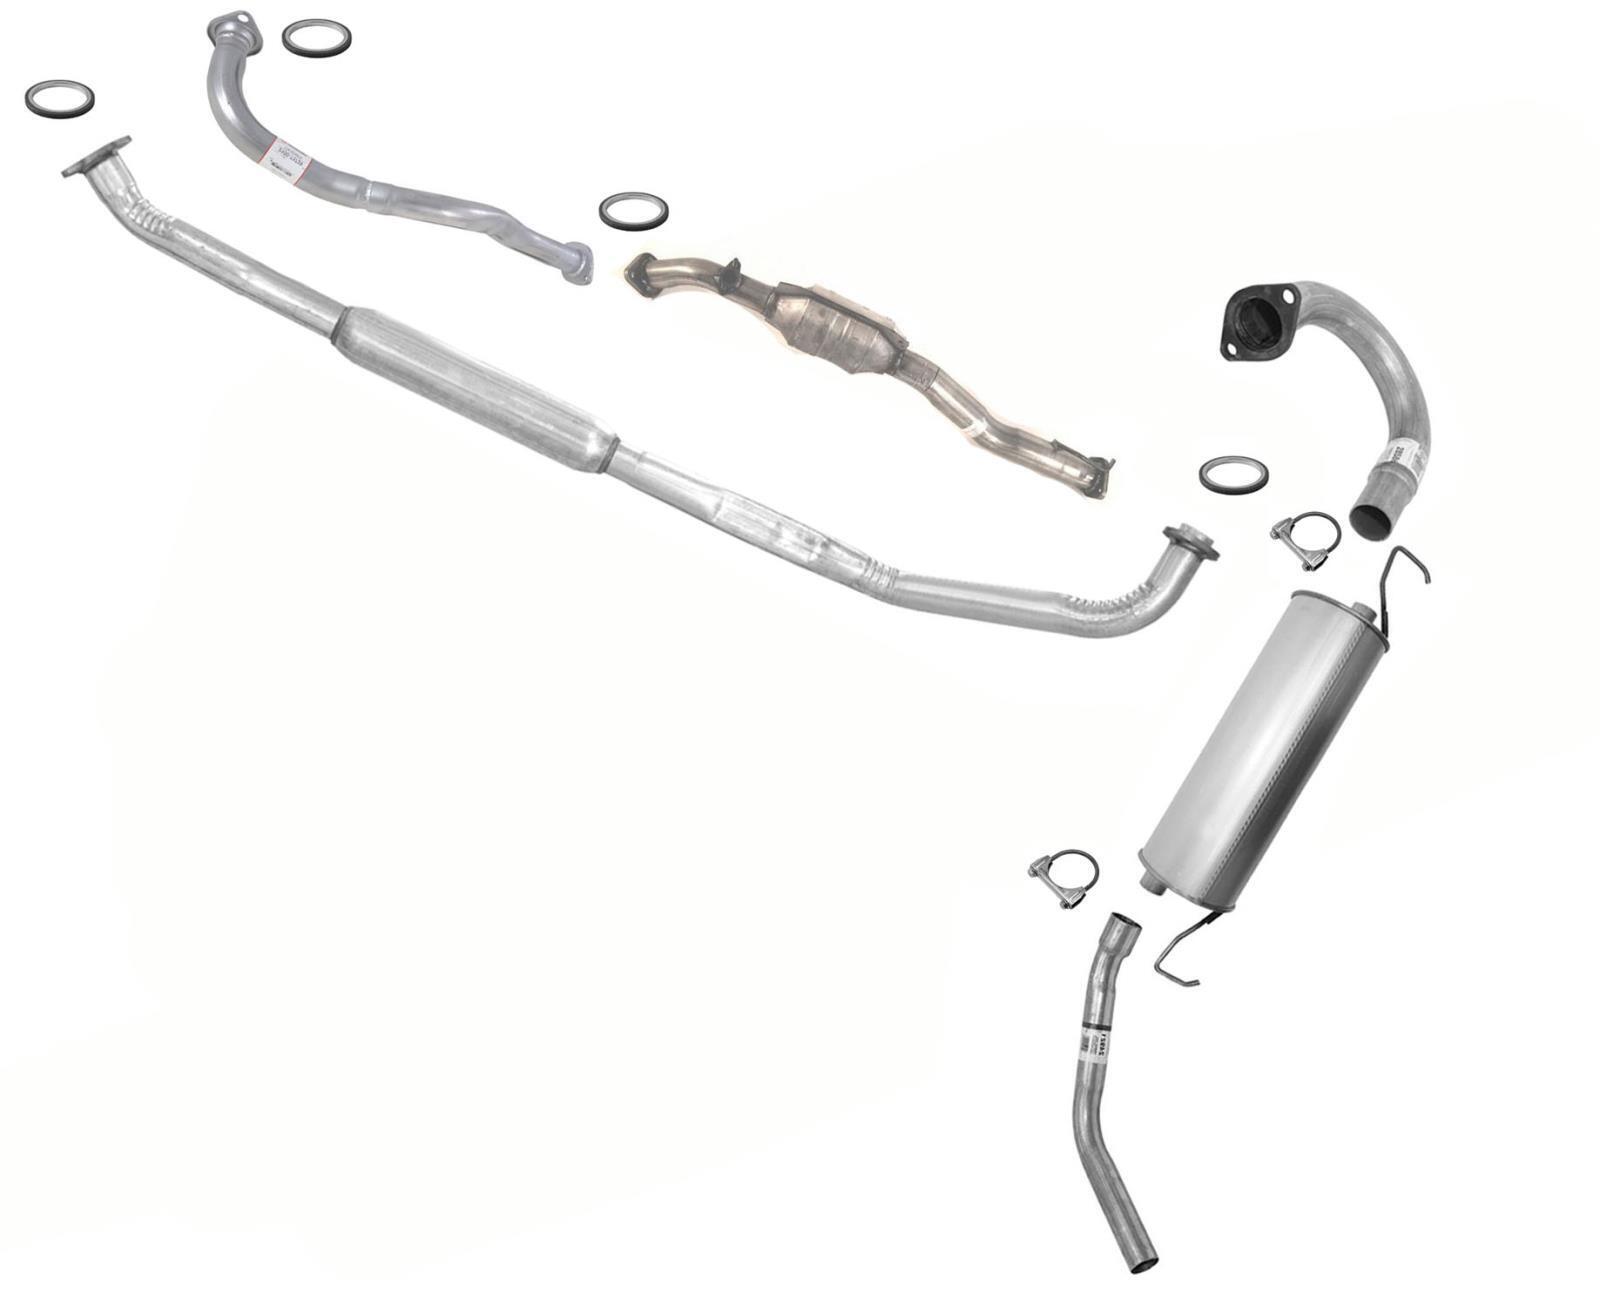 Exhaust System Converter for Toyota RAV4 4Door 98-00 with Federal Emissions